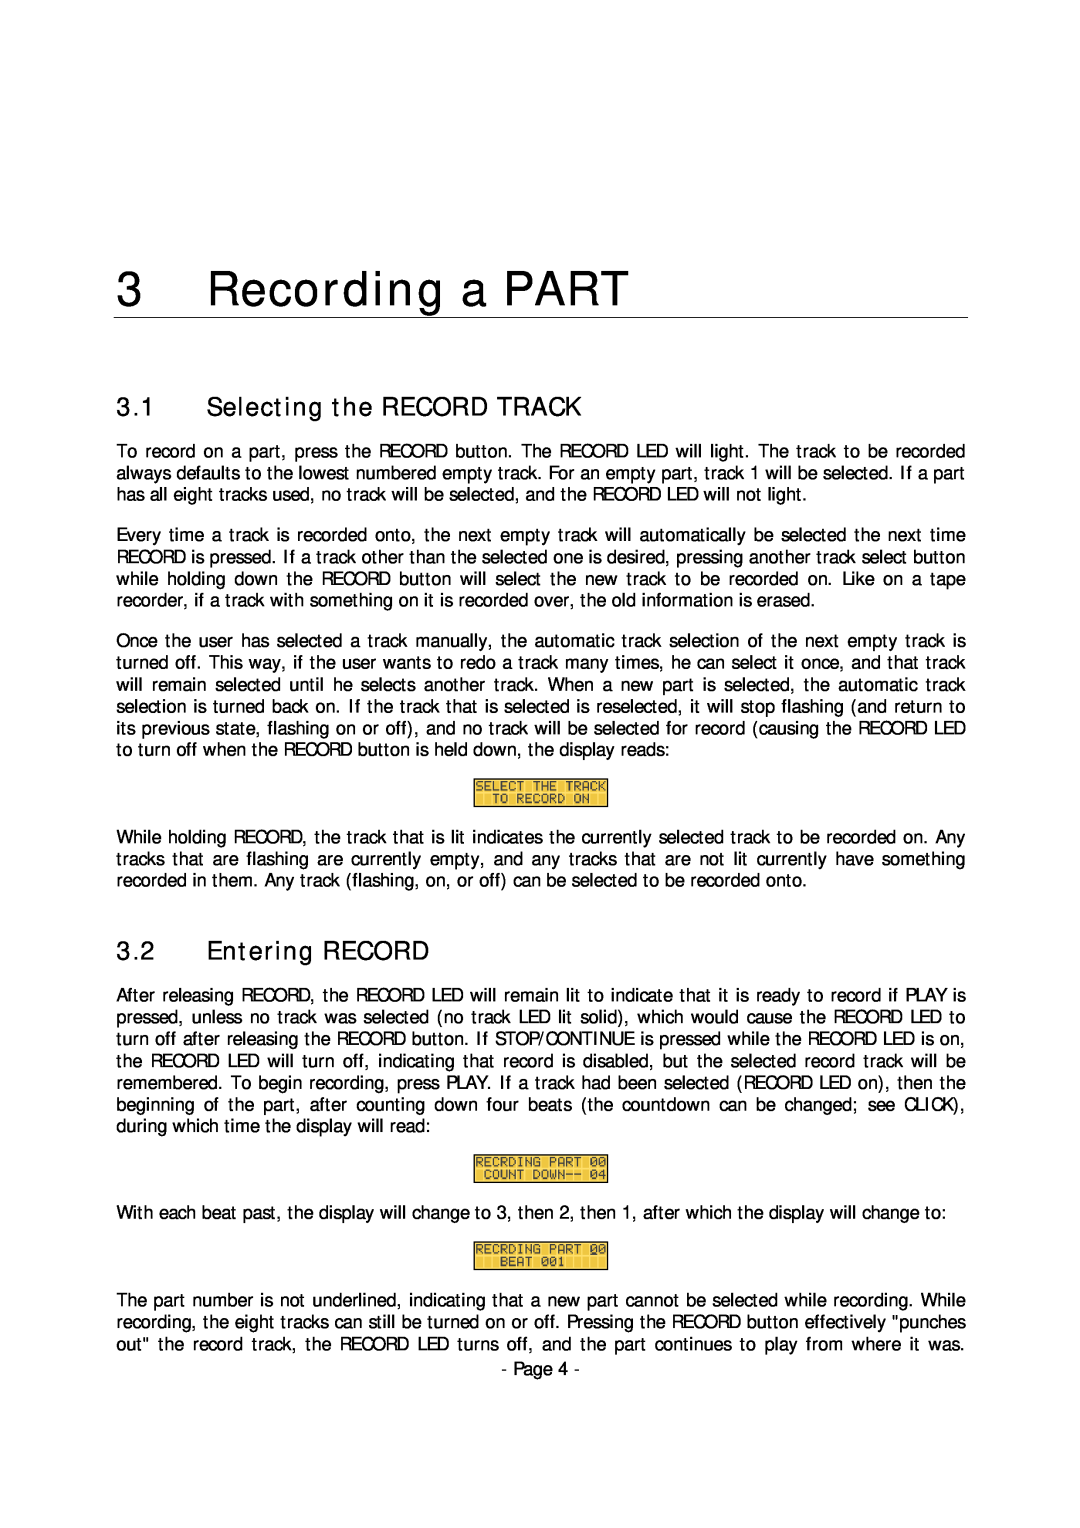 Alesis MMT-8 manual Recording a PART, 3.1Selecting the RECORD TRACK, 3.2Entering RECORD 